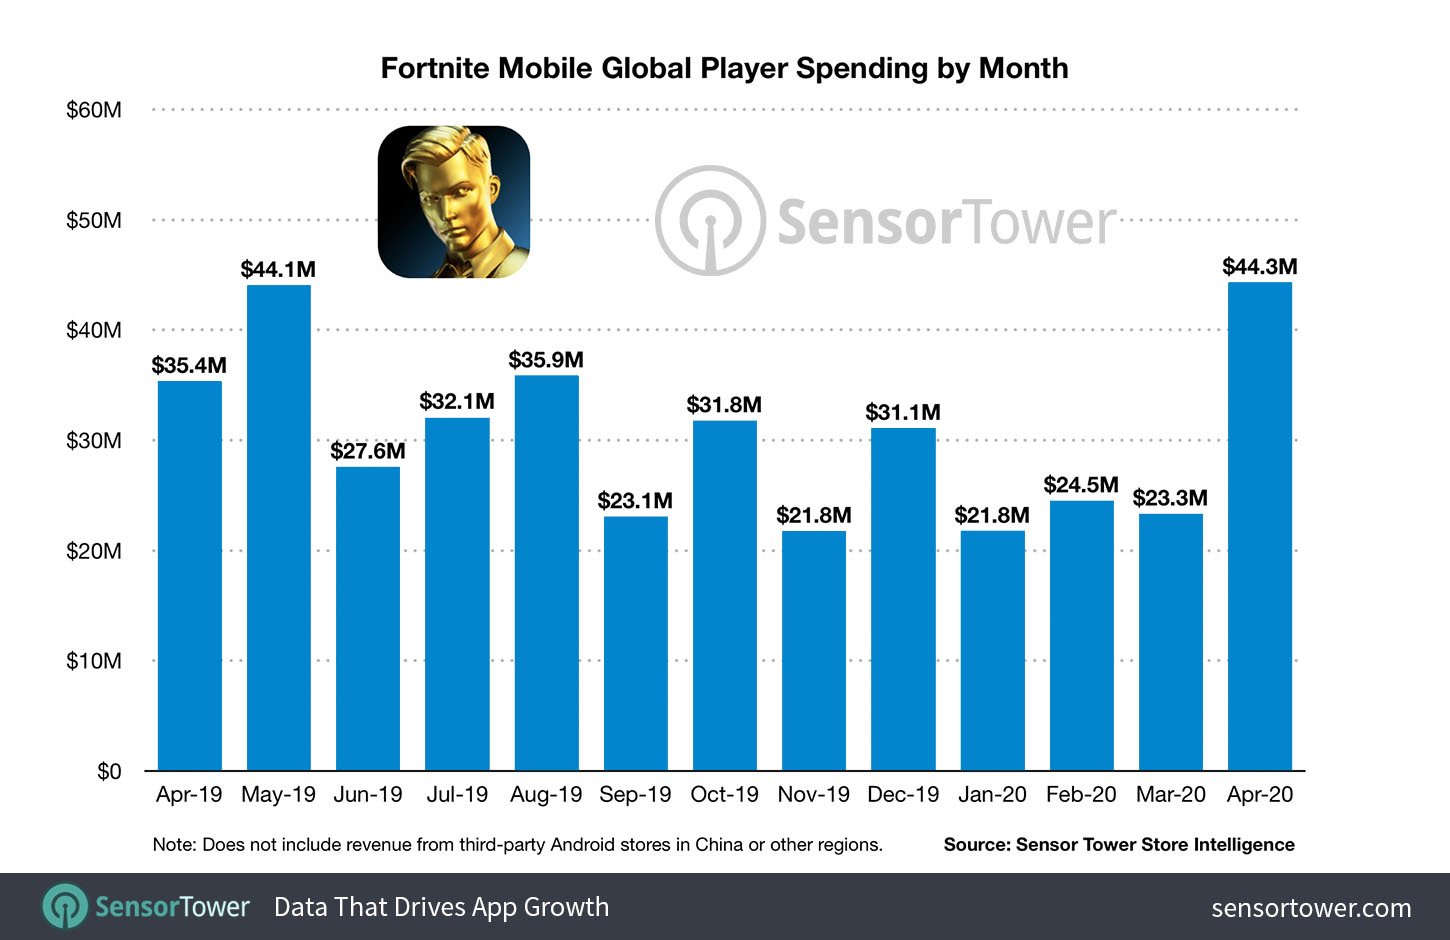 Fortnite Mobile Global Player Spending by Month